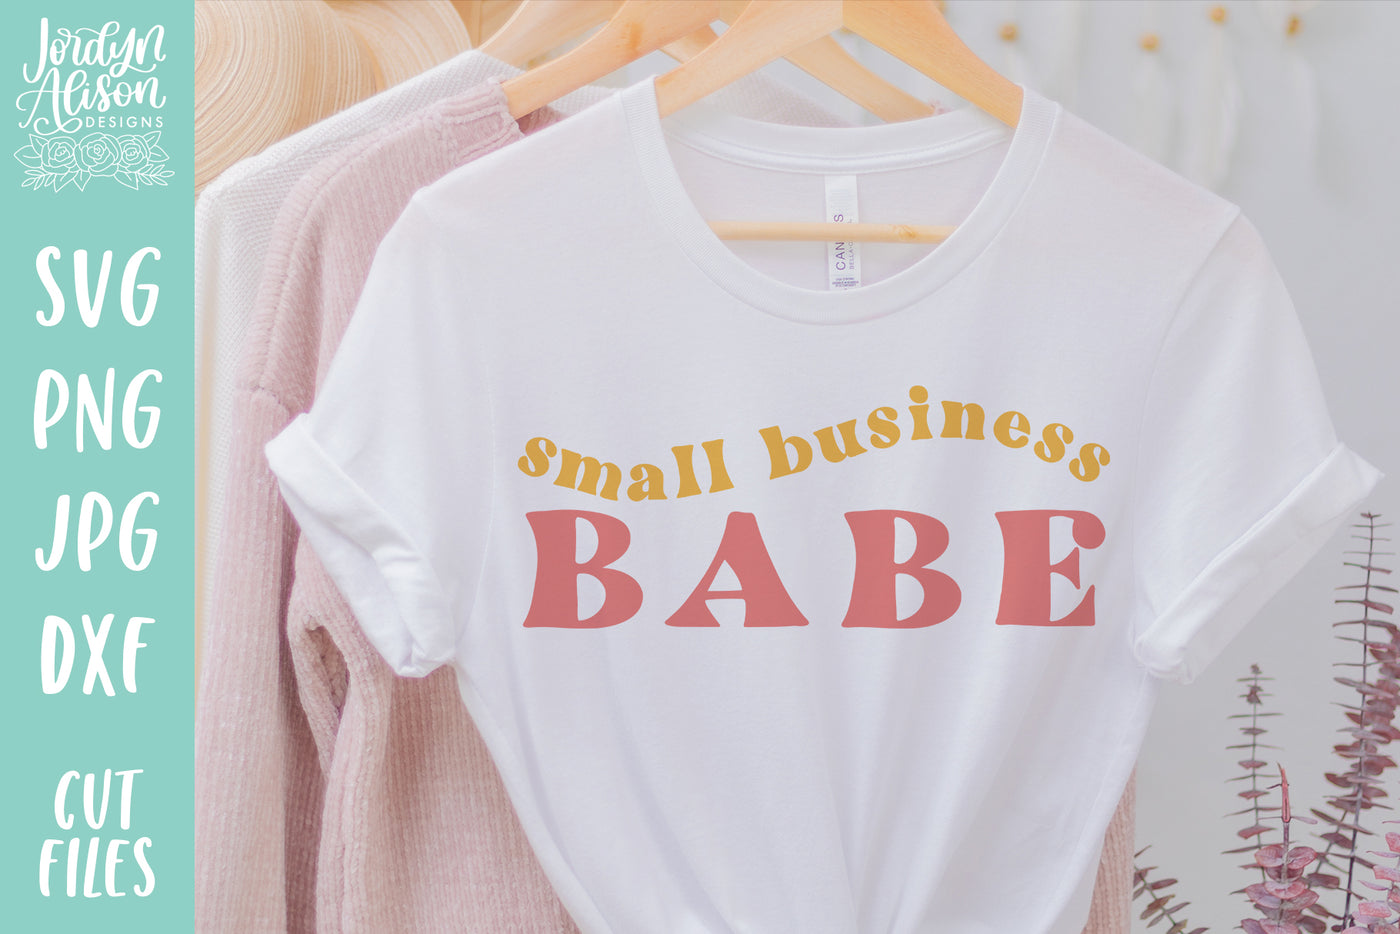 Small Business Babe SVG